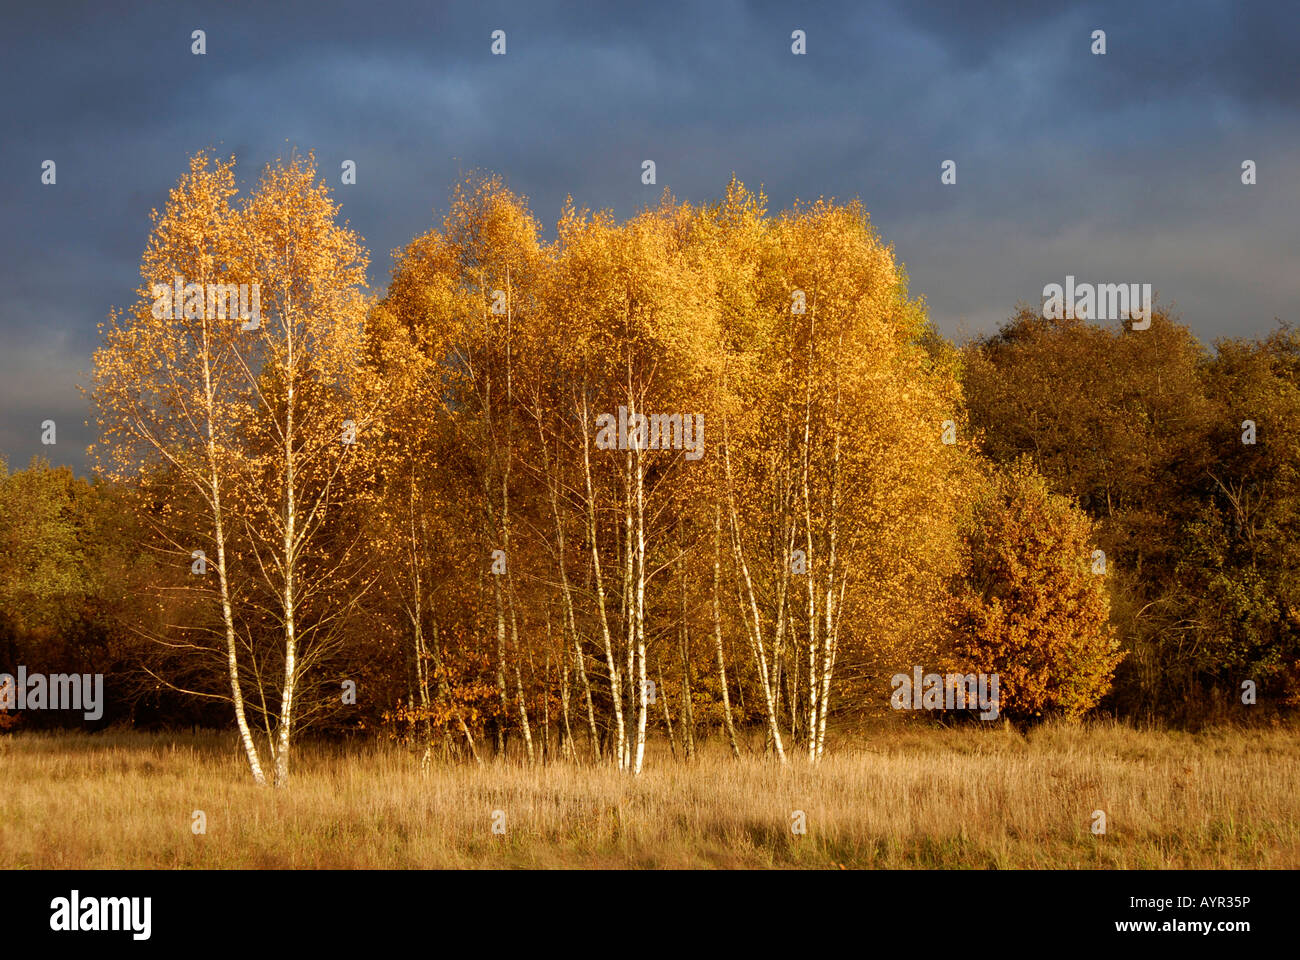 Dark thunderclouds looming over birch trees (Betula) in autumn, Karower Teiche Nature Reserve, Berlin, Germany Stock Photo